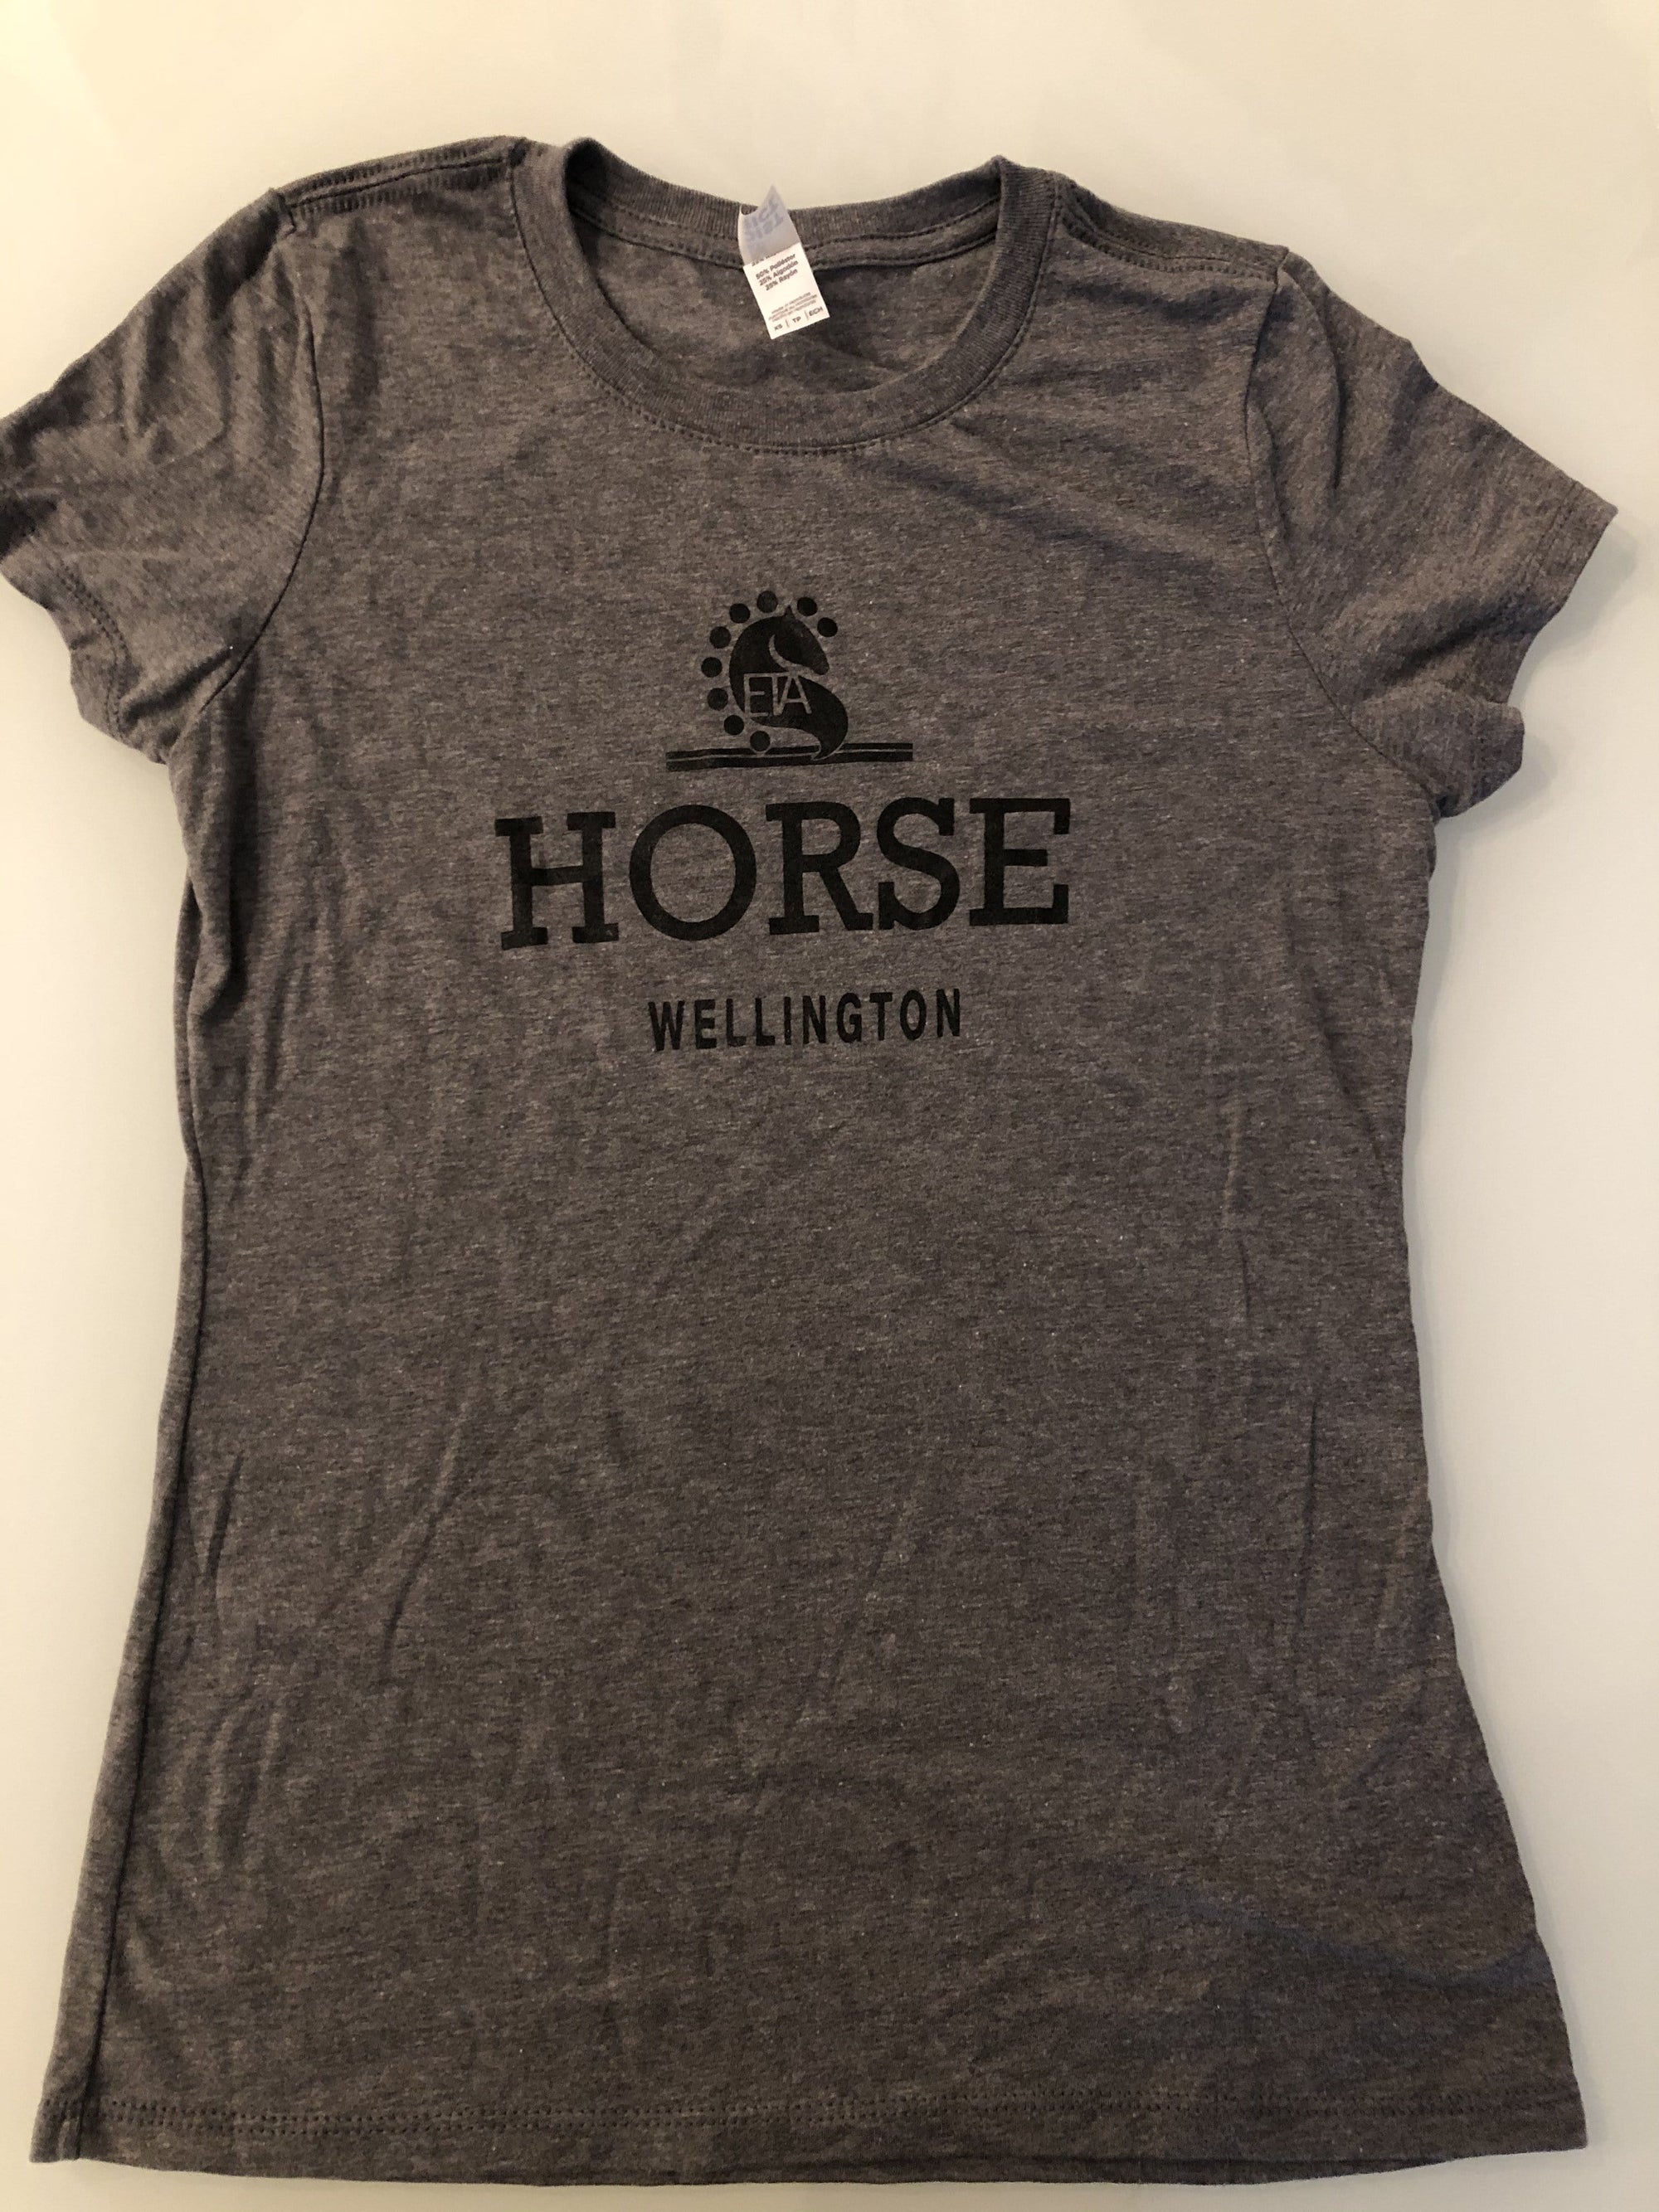 Equestrian Team Apparel Graphic Tees Grey Horse Graphic Tee - ETA equestrian team apparel online tack store mobile tack store custom farm apparel custom show stable clothing equestrian lifestyle horse show clothing riding clothes horses equestrian tack store